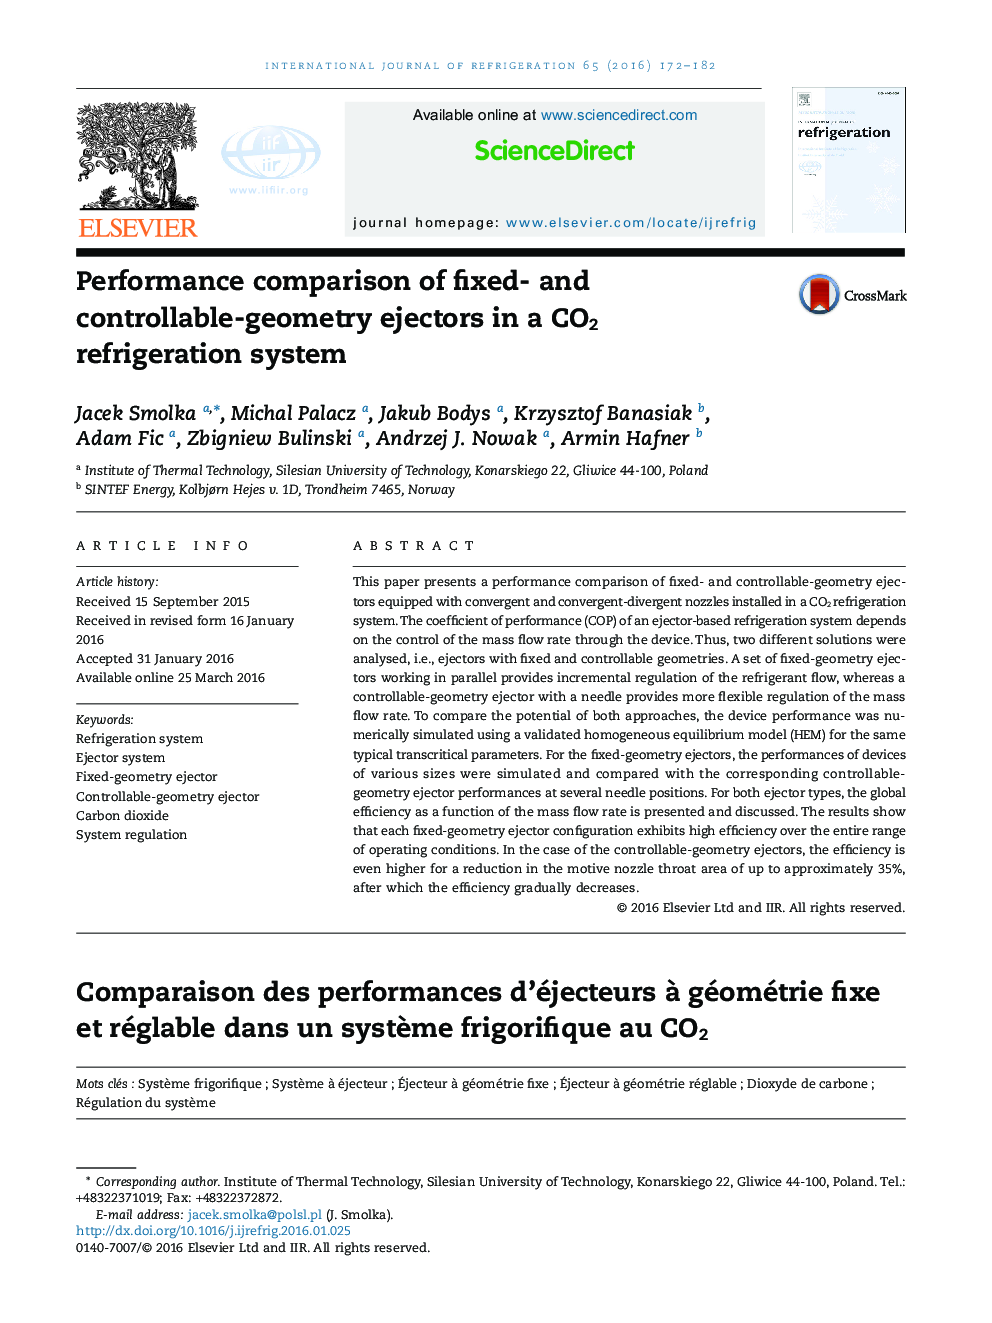 Performance comparison of fixed- and controllable-geometry ejectors in a CO2 refrigeration system